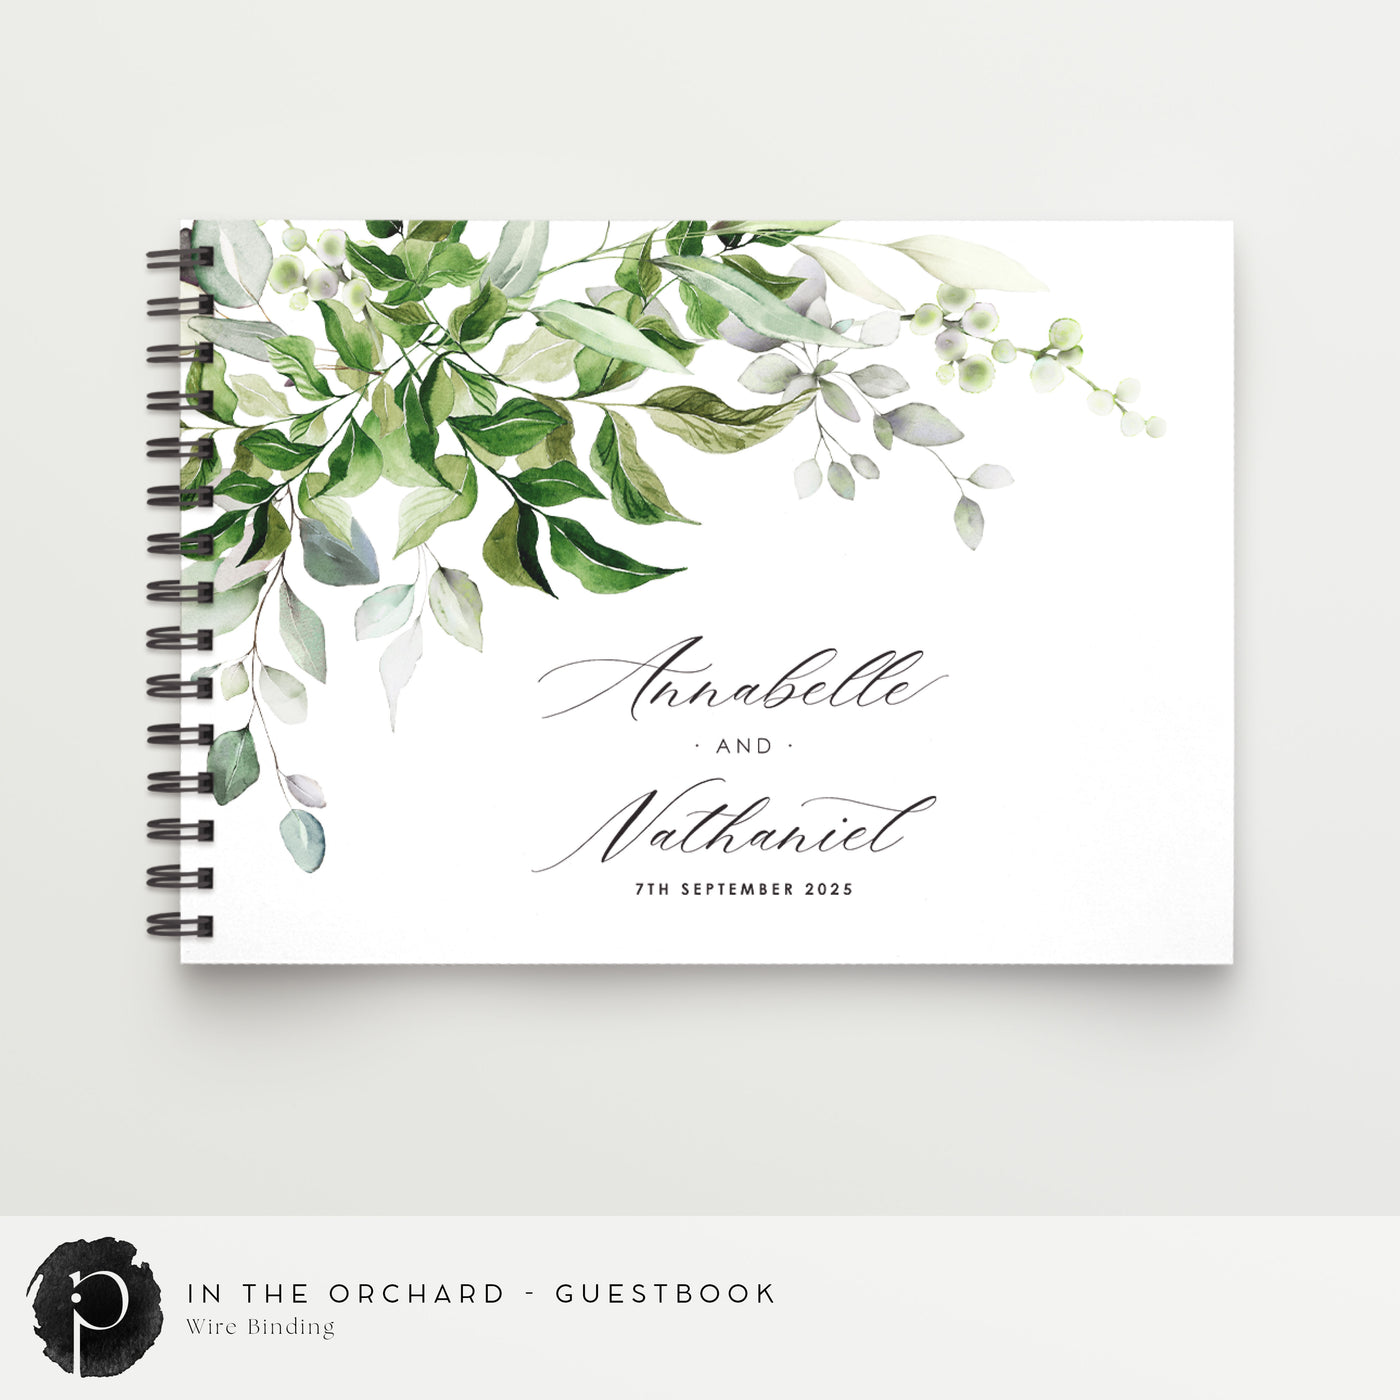 In The Orchard - Guestbook